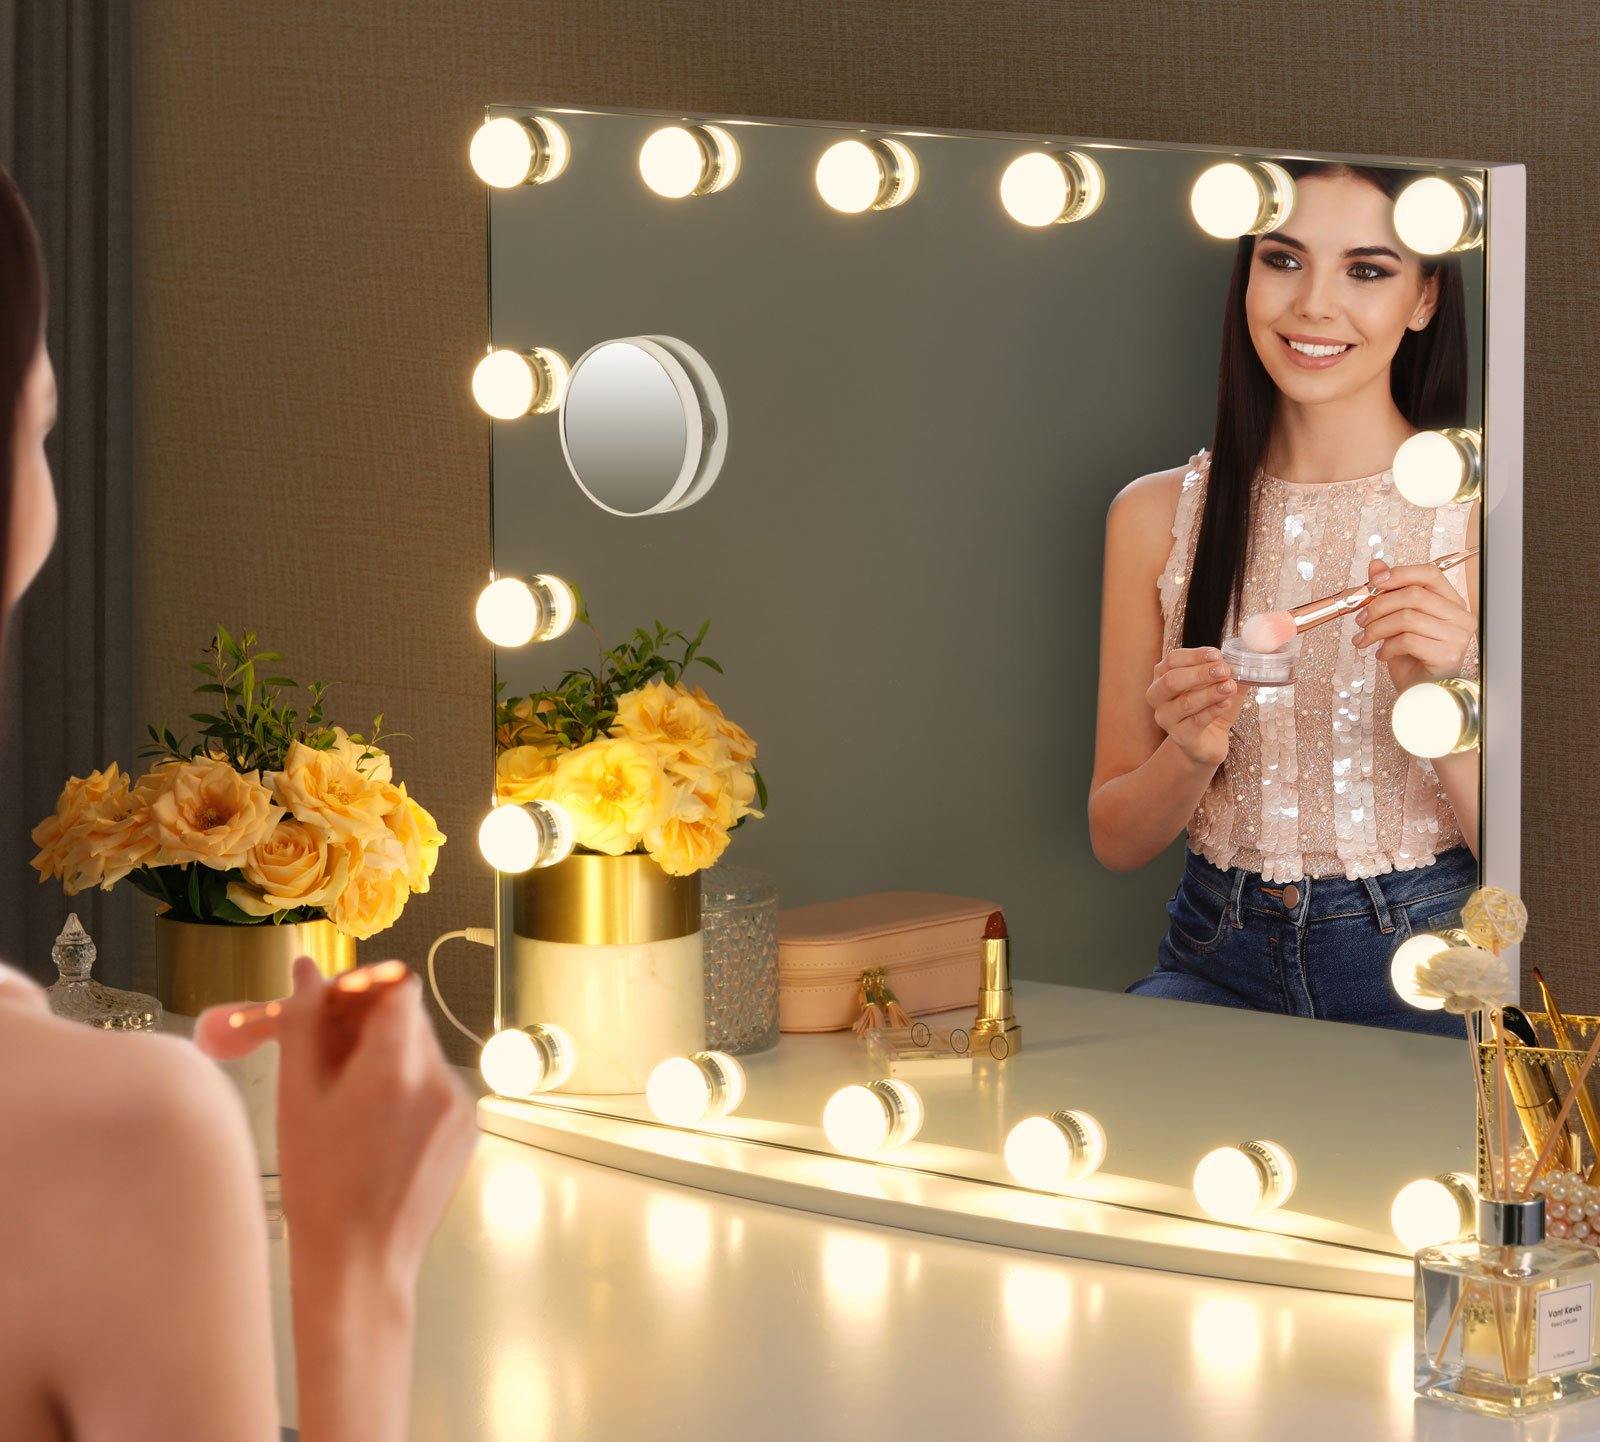  LUXFURNI Vanity Lighted Tri-fold Makeup Mirror with 10  Dimmable LED Bulbs, Touch Control Lights Tabletop Hollywood Cosmetic Mirror  (Rose Gold)